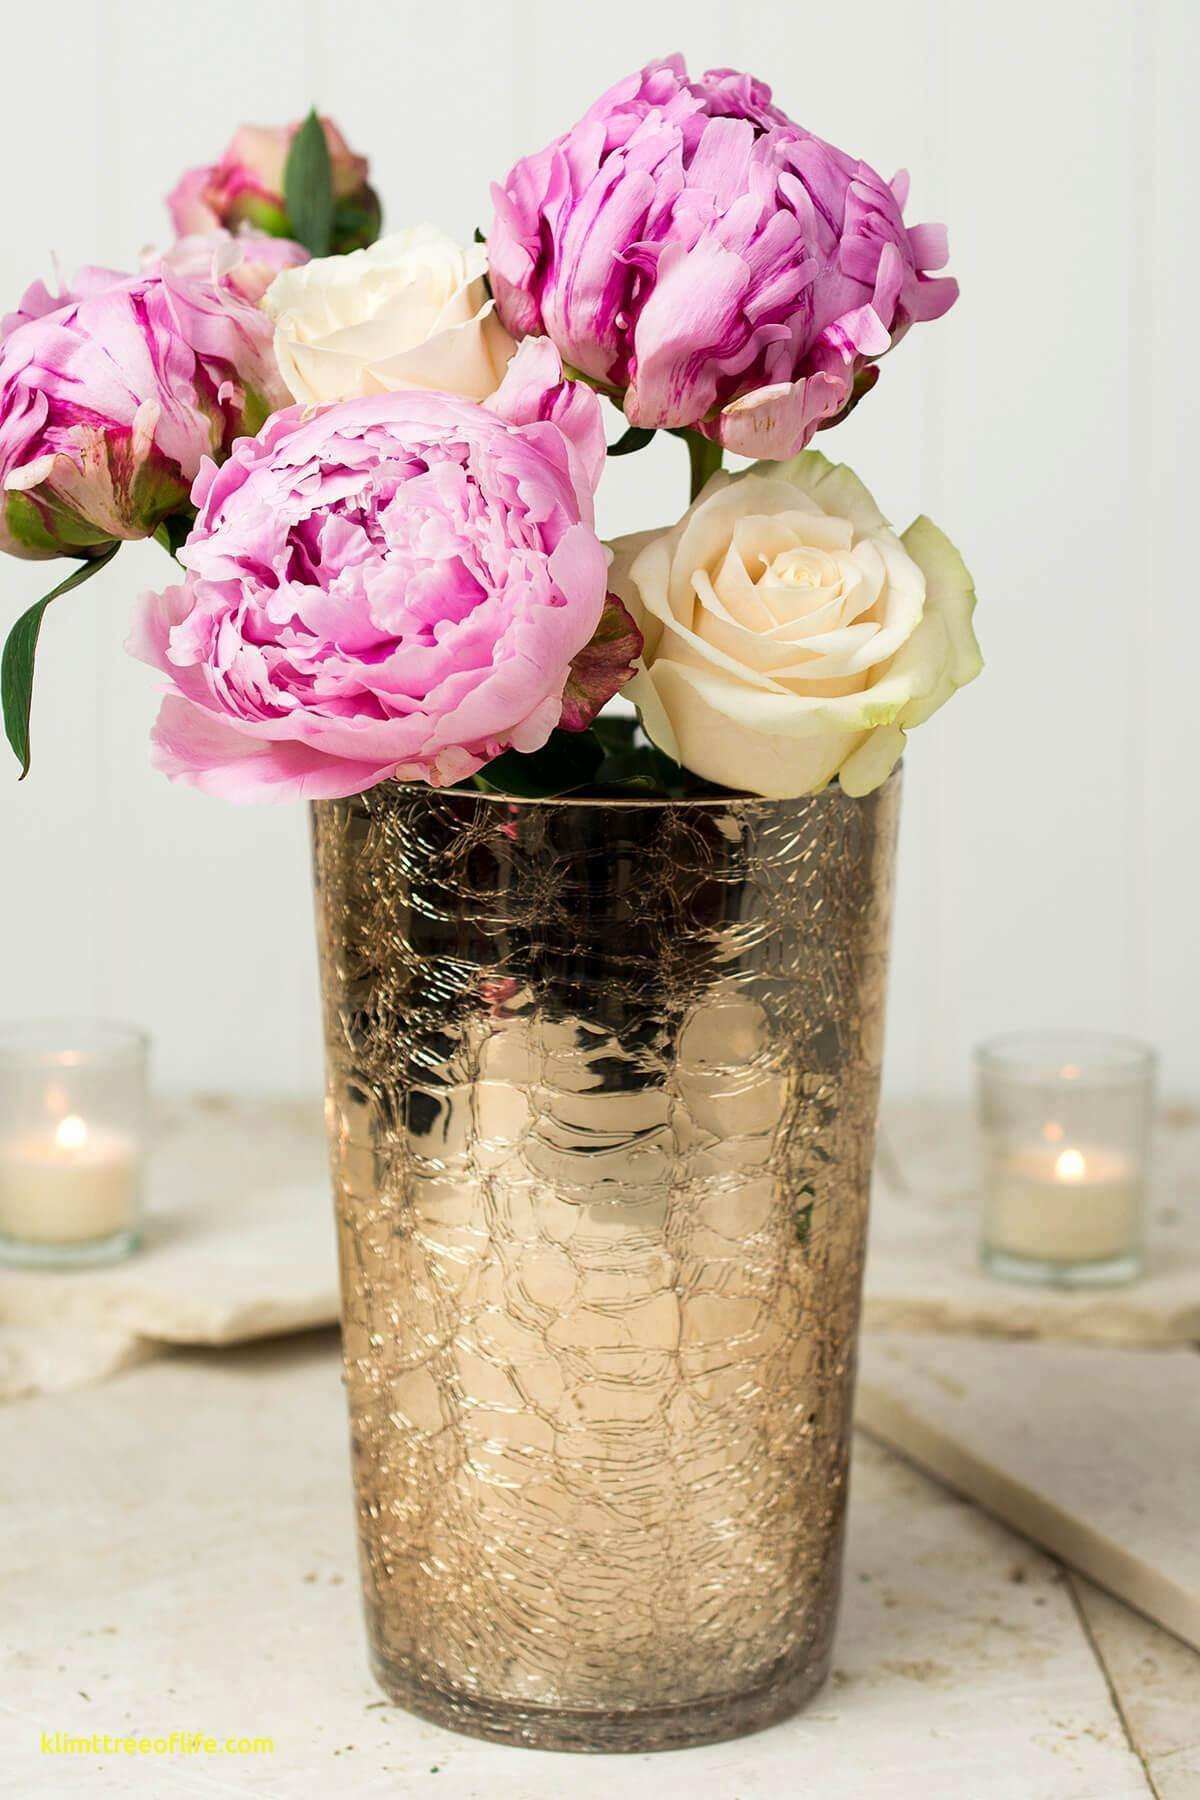 16 Spectacular Fake Pink Flowers In Vase 2024 free download fake pink flowers in vase of flower wall decor luxe h vases wall hanging flower vase newspaper i with regard to flower wall decor beau flower decor wall luxury il fullxfull h vases hanging w